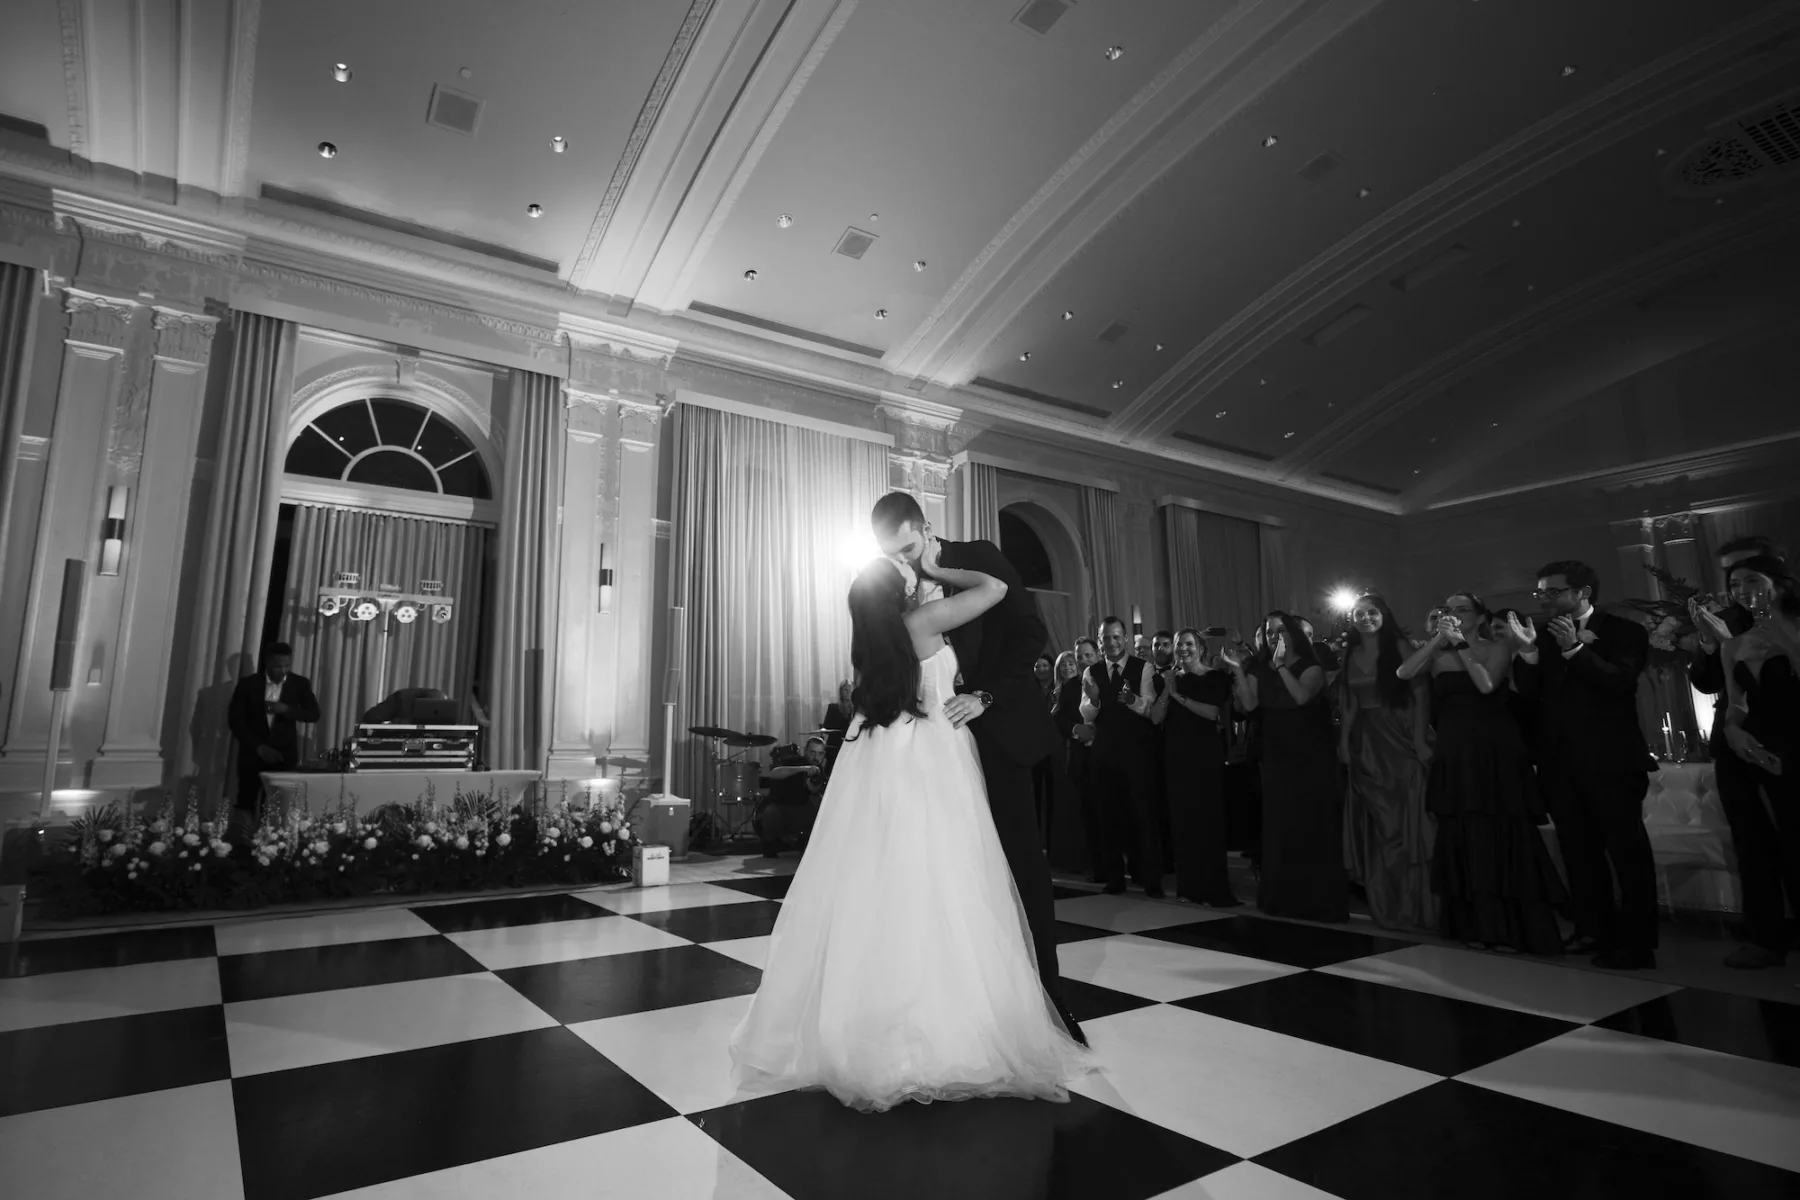 Bride and Groom First Dance Wedding Portrait | Tampa Bay Content Creator Behind The Vows | St Pete Event Planner Coastal Coordinating | DJ Graingertainment | Photographer Dewitt for Love Photography